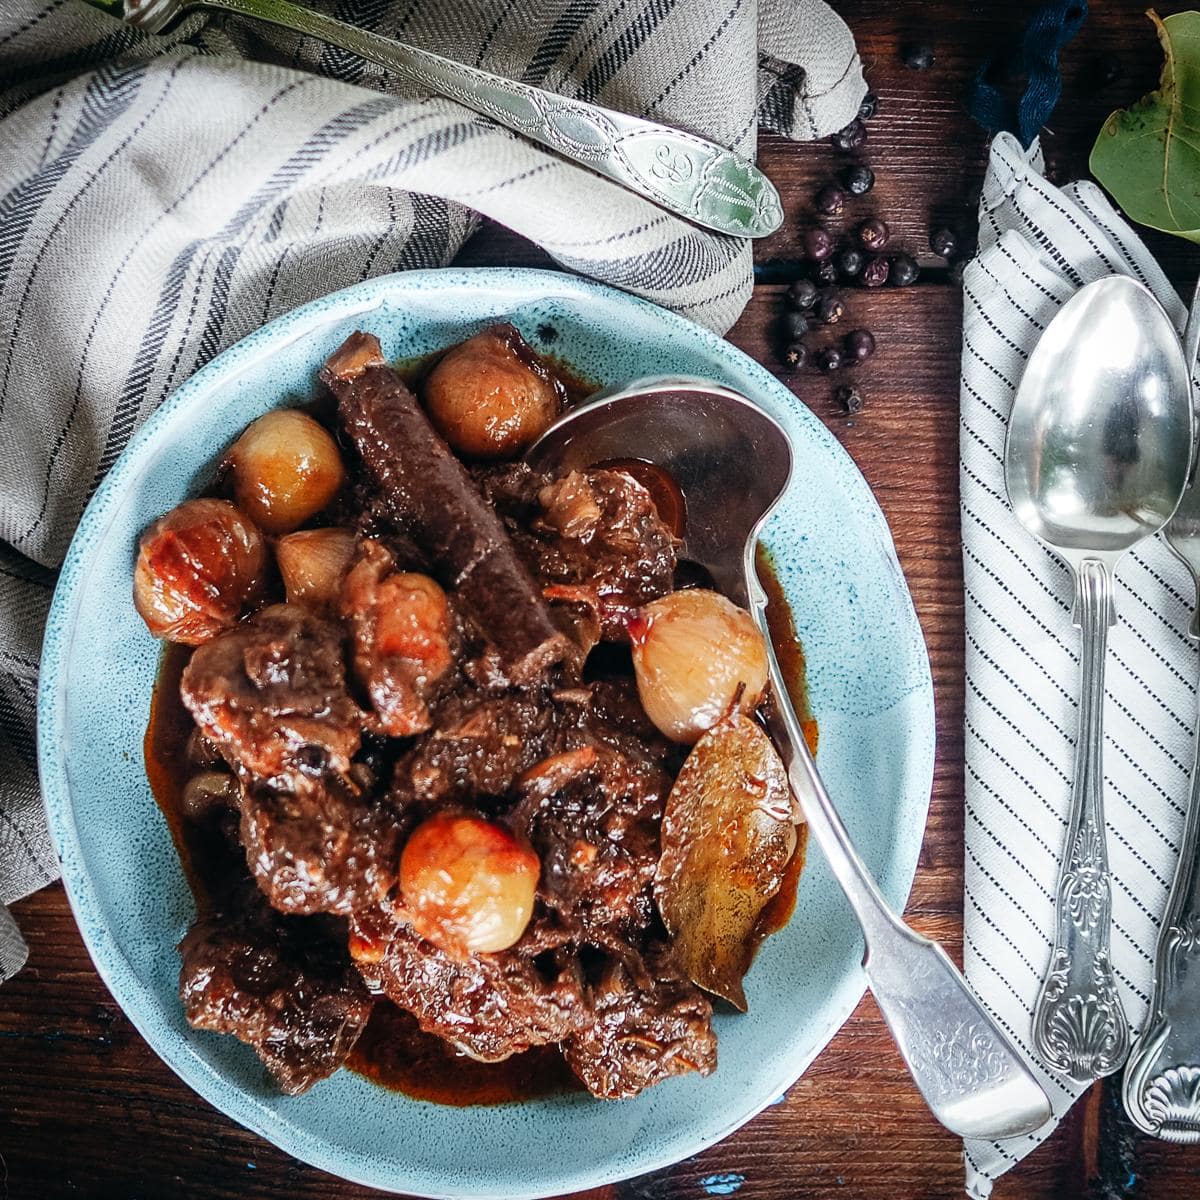 Beef stifado served in a pale blue bowl in rustic setting